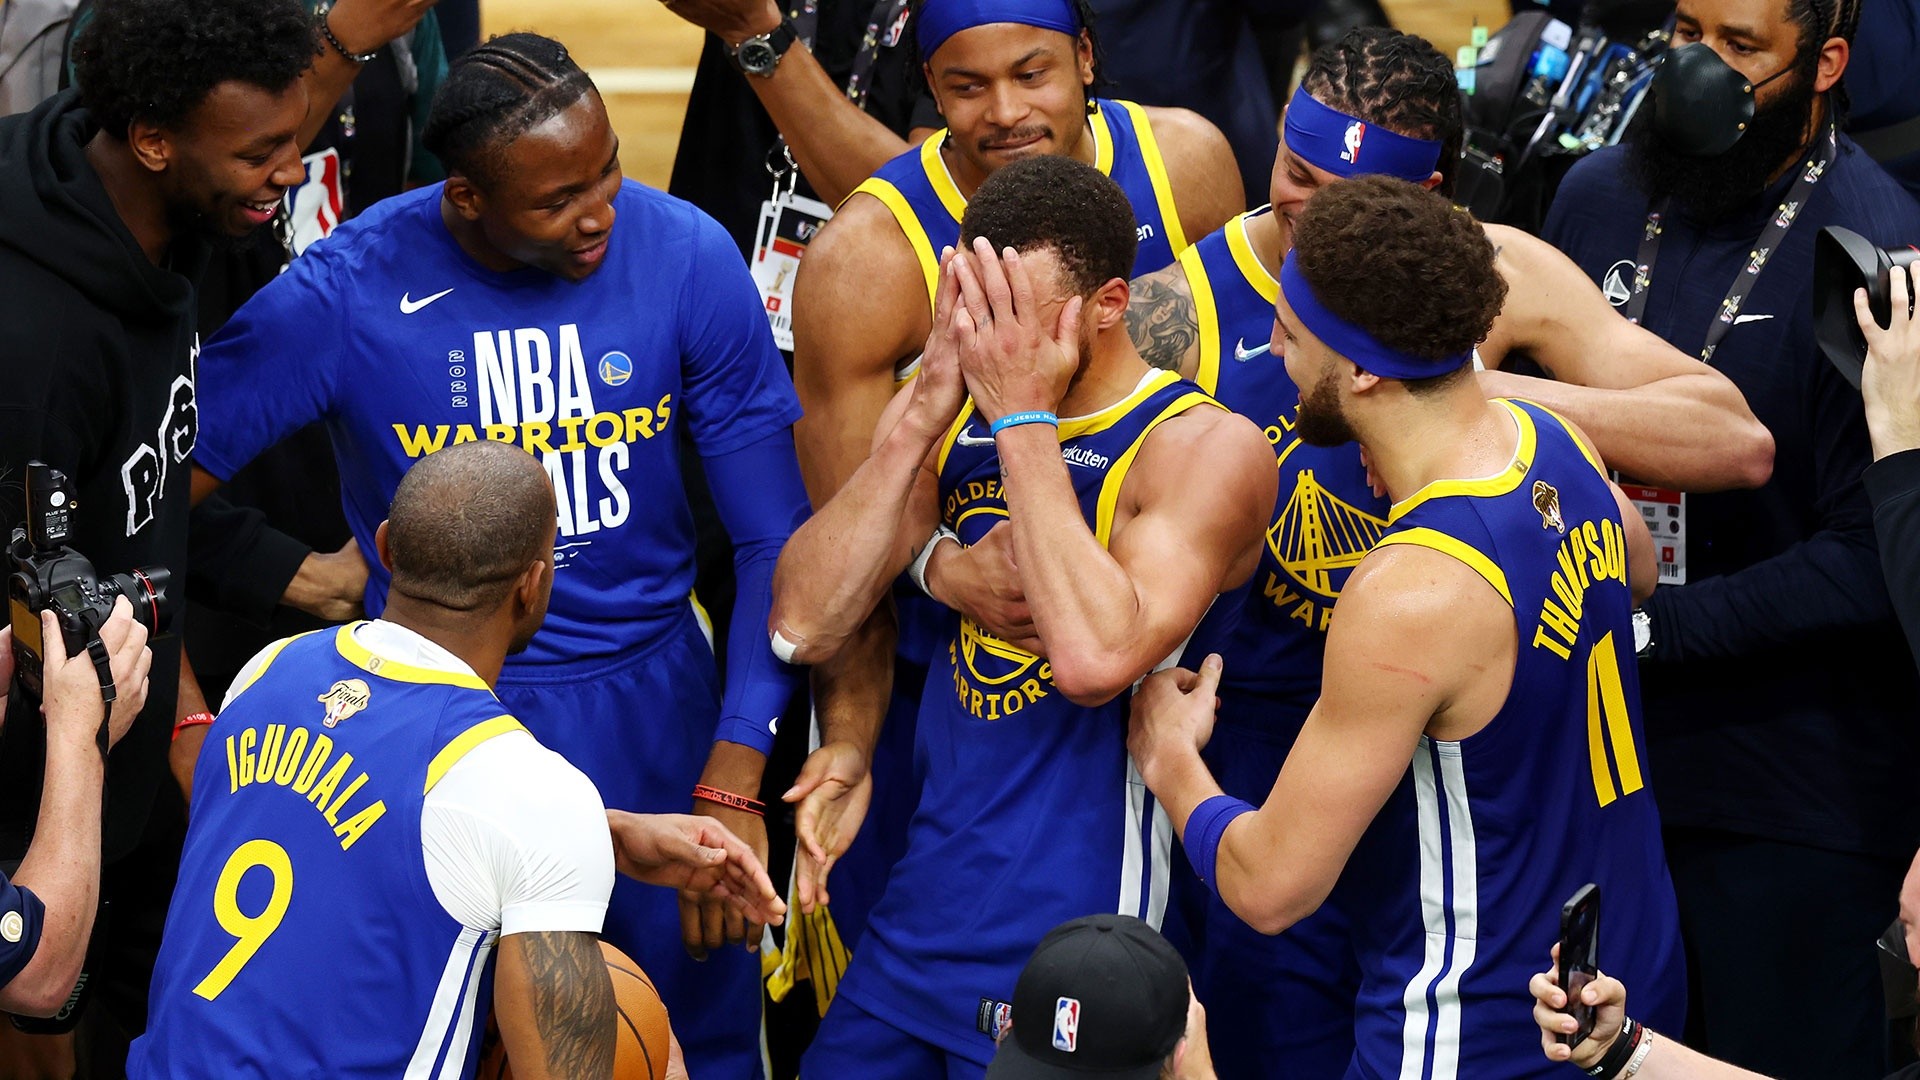 Warriors beat Celtics to win 4th NBA title in 8 years